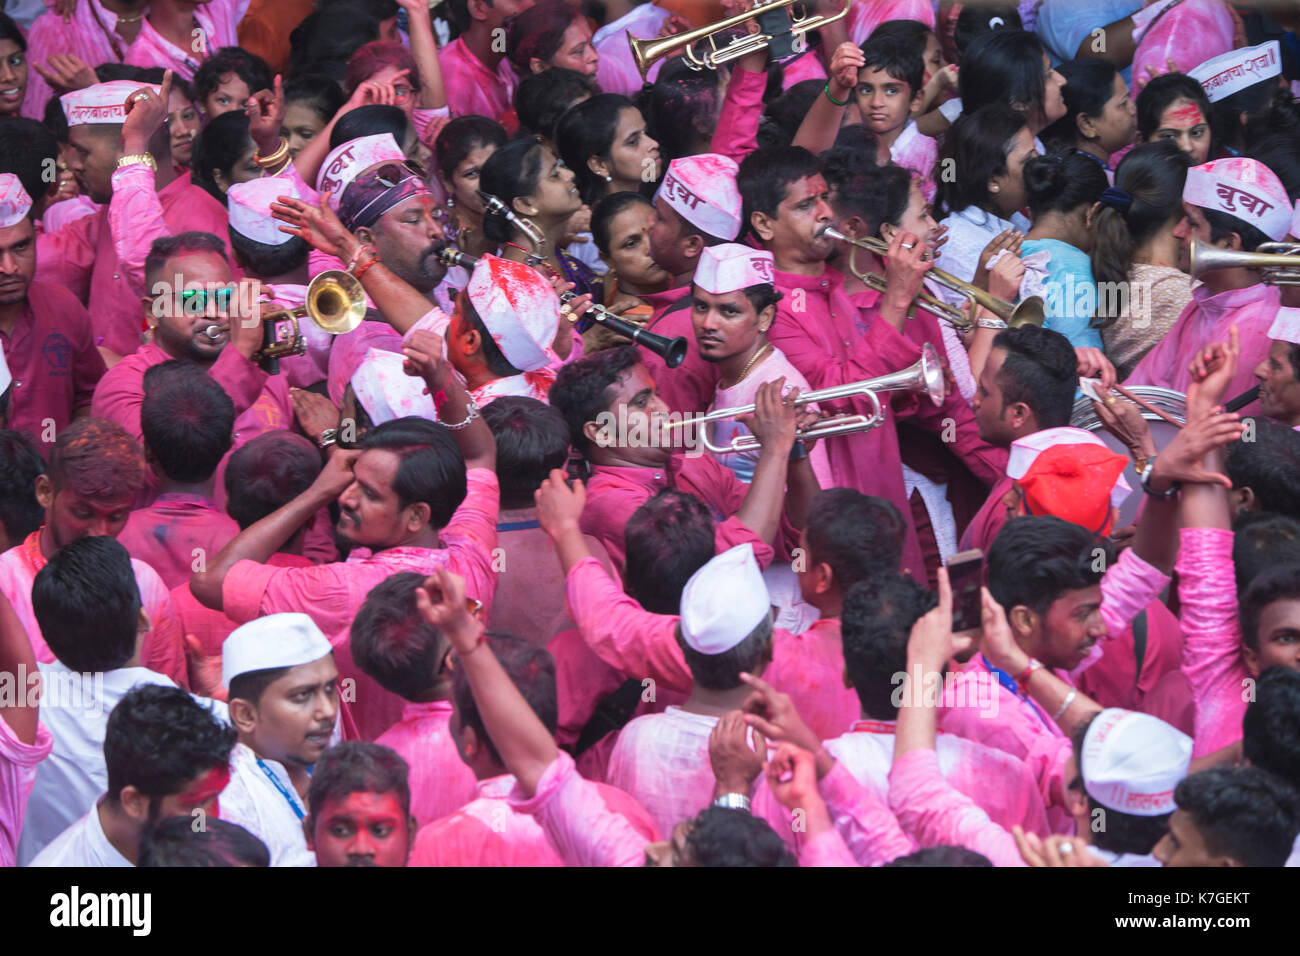 The image of Devotees dancing with music for Ganpati or Elephant headed lord  on the way to immersion at lalbaug, .Mumbai, India Stock Photo